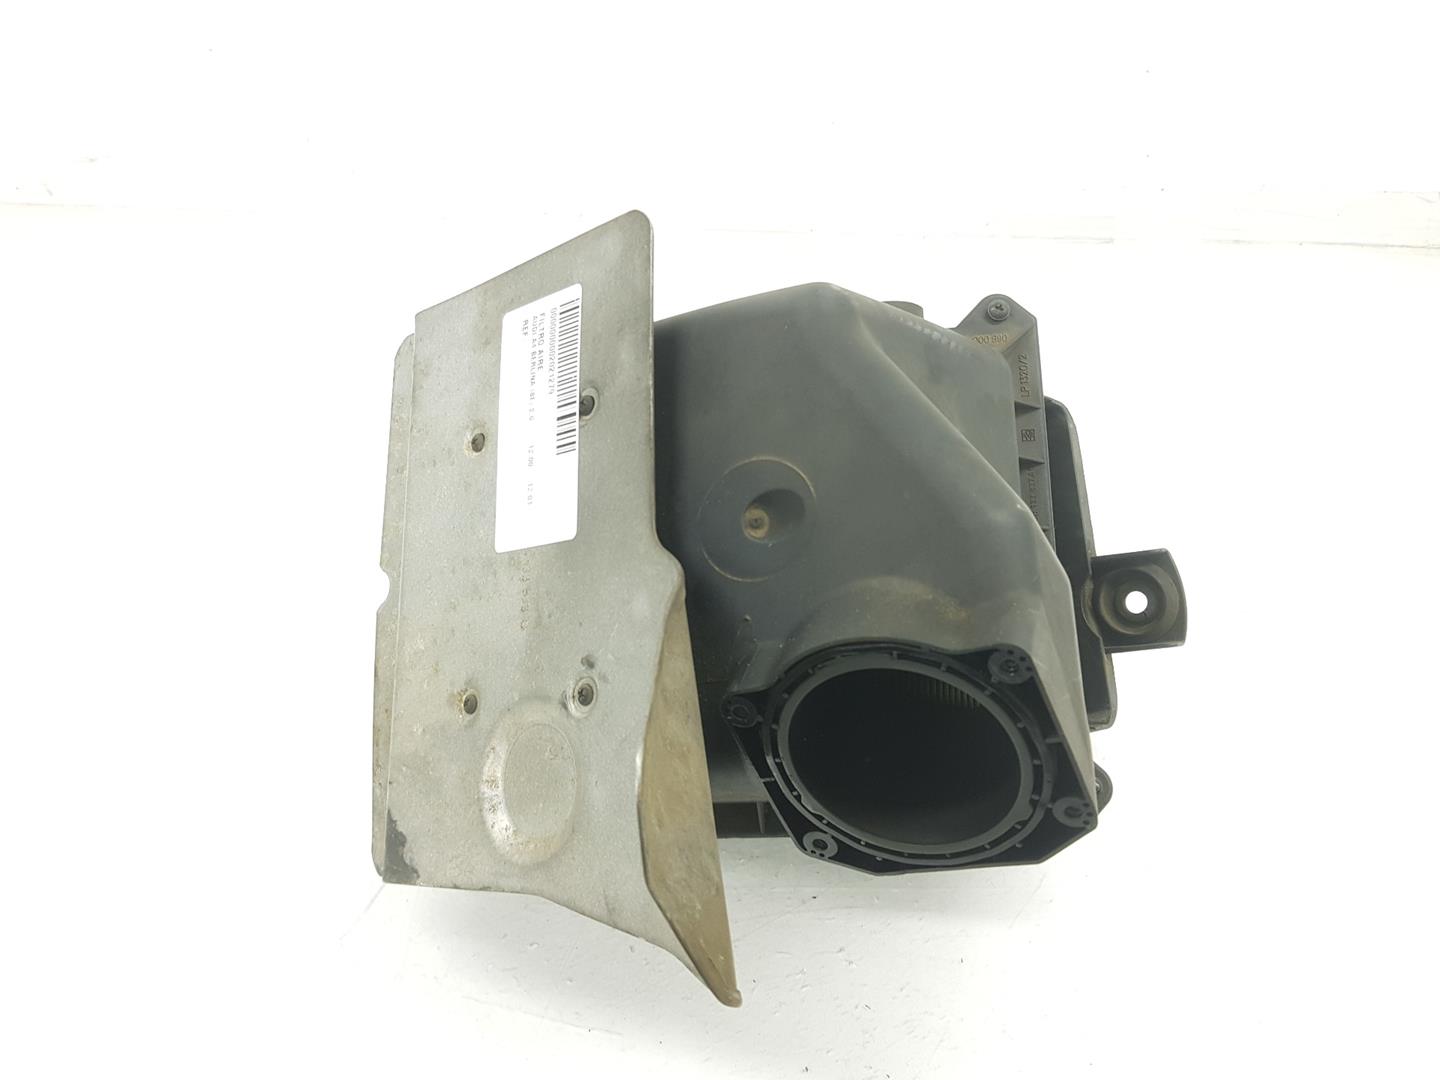 AUDI A4 B6/8E (2000-2005) Other Engine Compartment Parts 06B133837AE, 06B133835BD 24215122